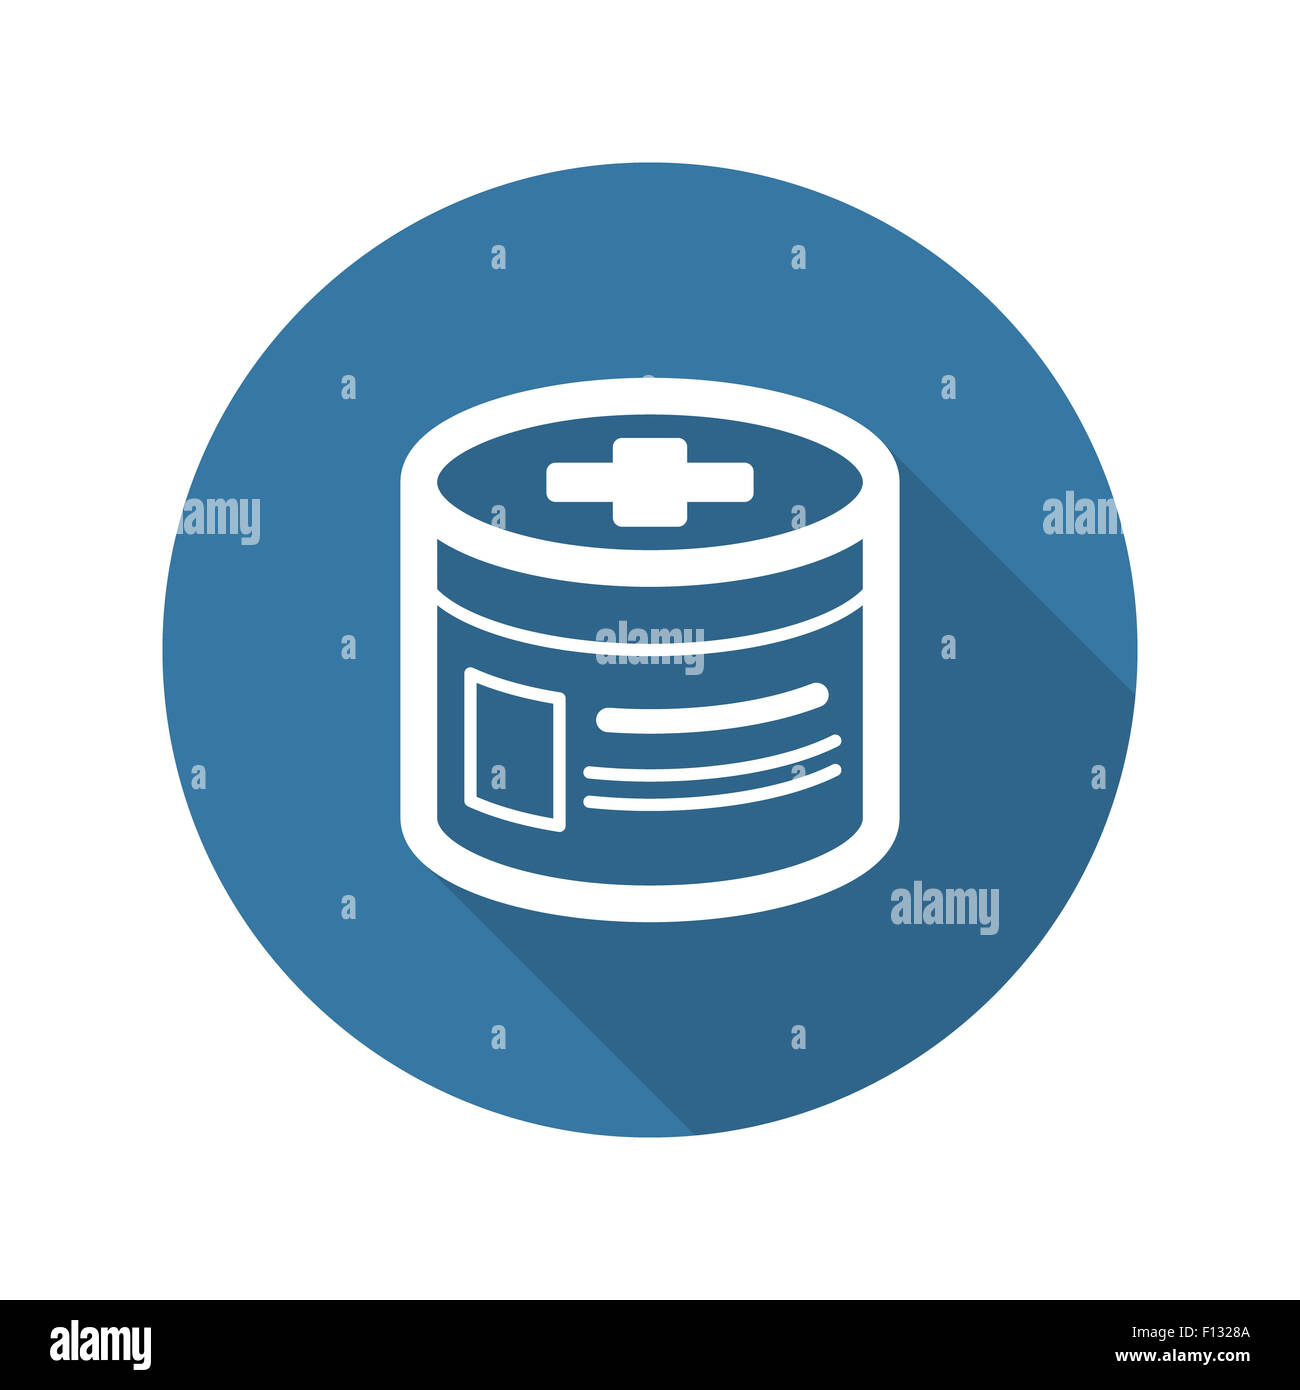 Pharmaceutical Drugs and Medical Services Icon. Flat Design. Isolated. Long Shadow. Stock Photo